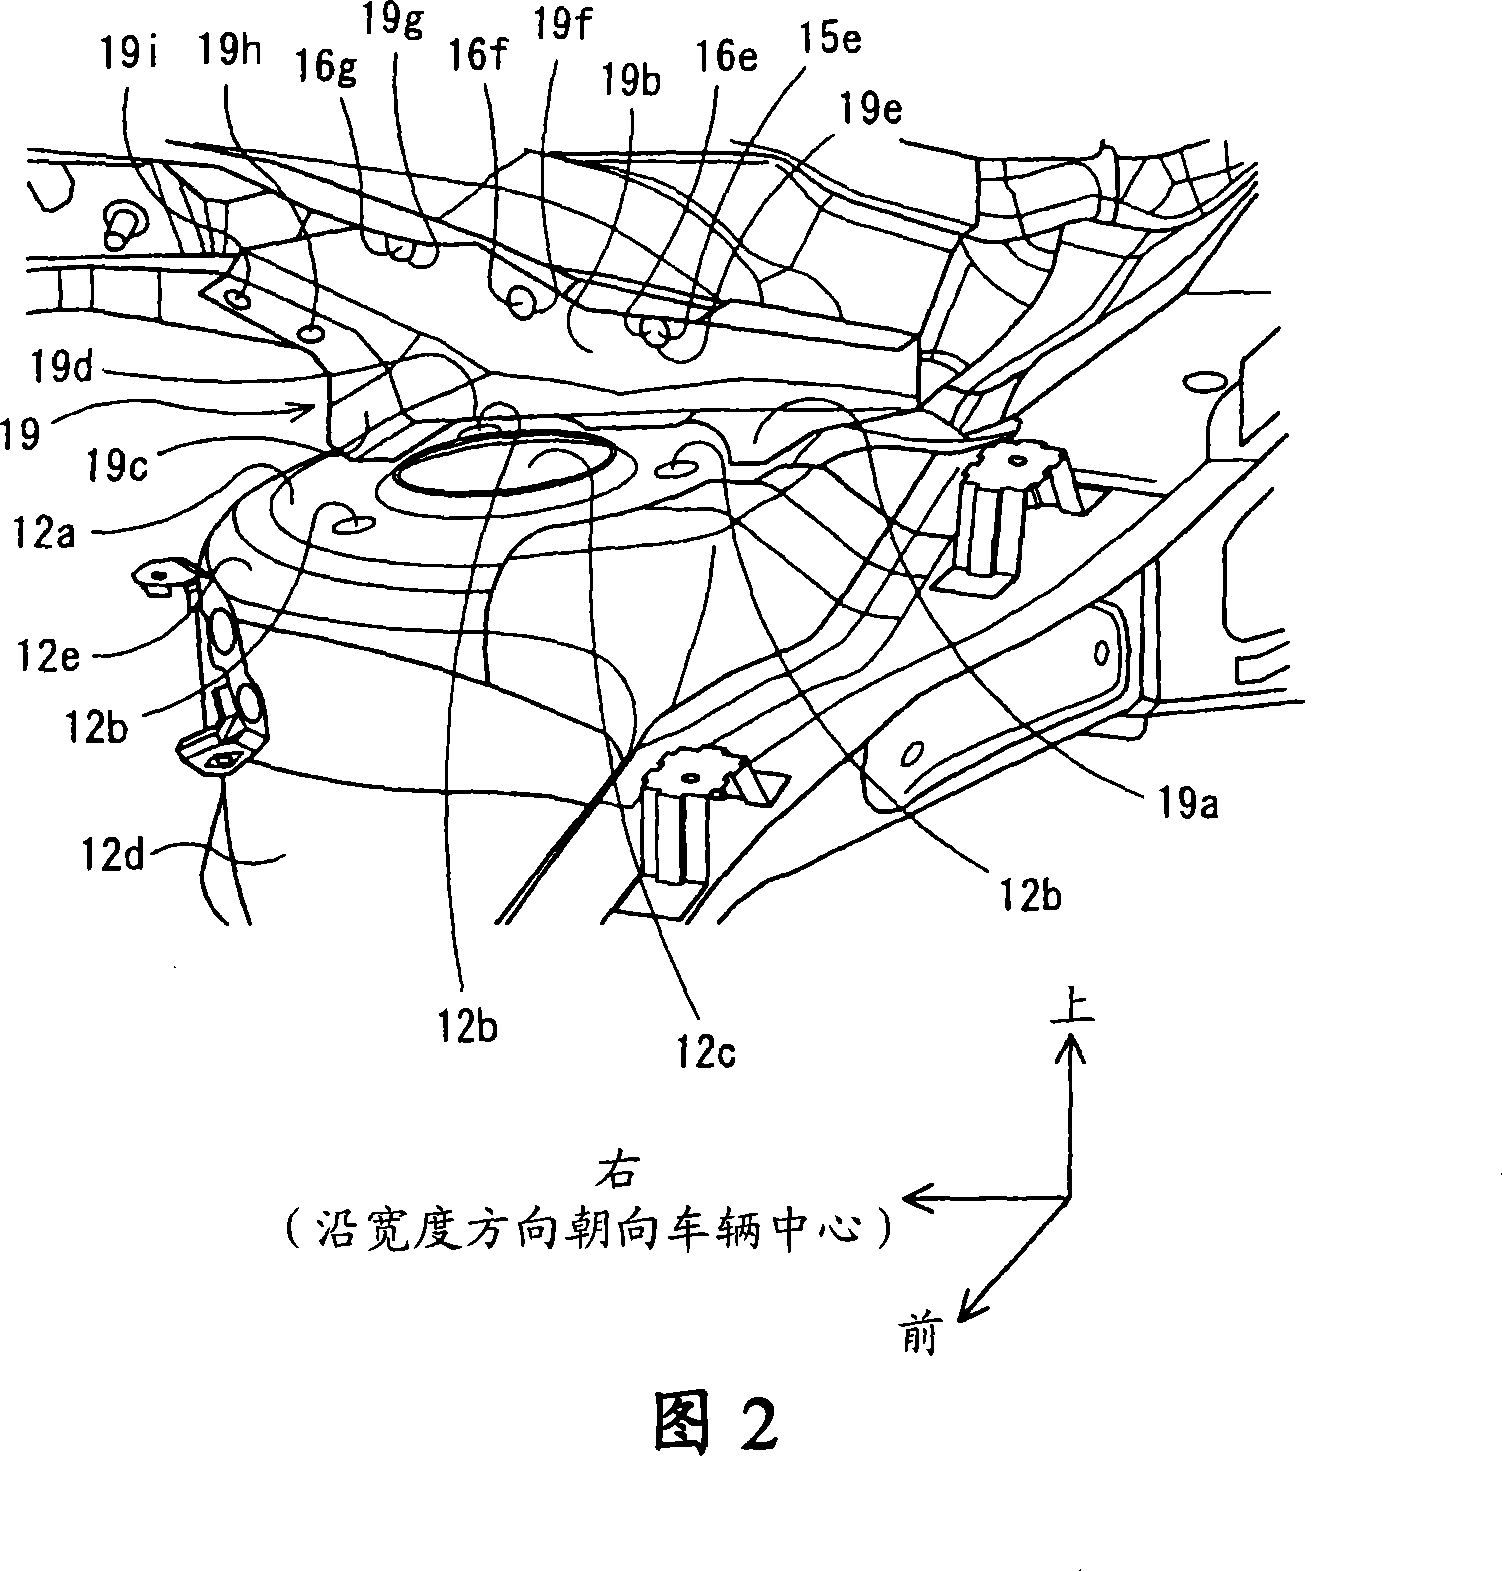 Structure for reinforcing rigidity of vehicle body